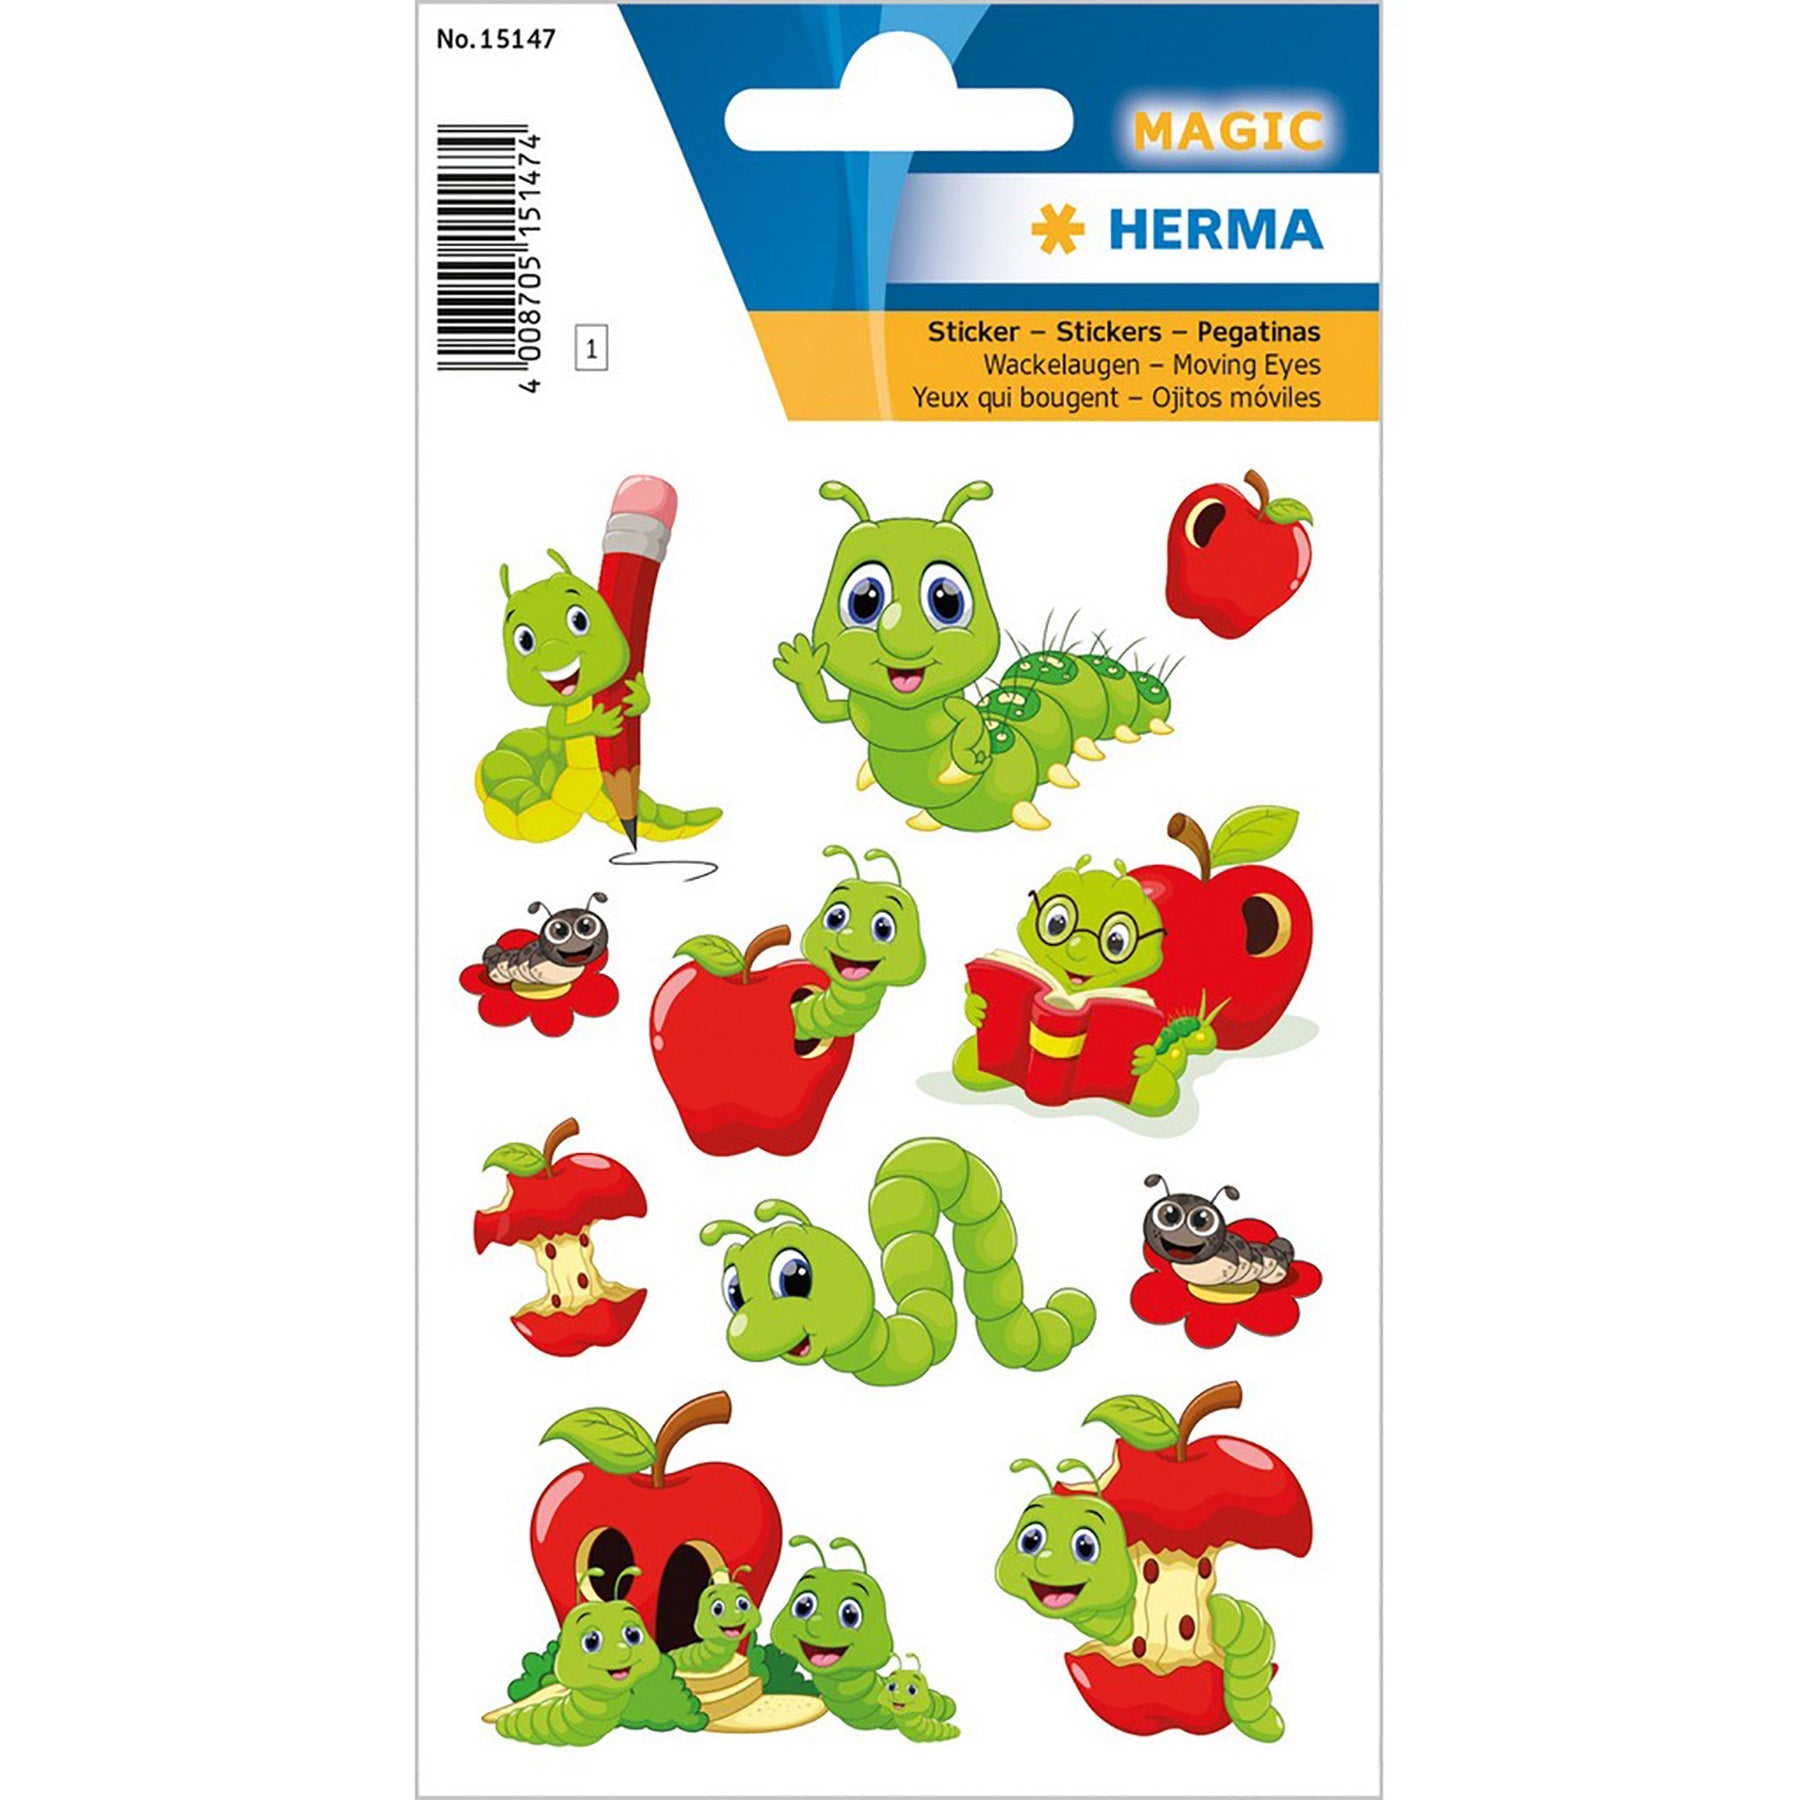 Herma Magic Stickers Fritz the Worm Moving Eyes 4.75x3.1in Sheet